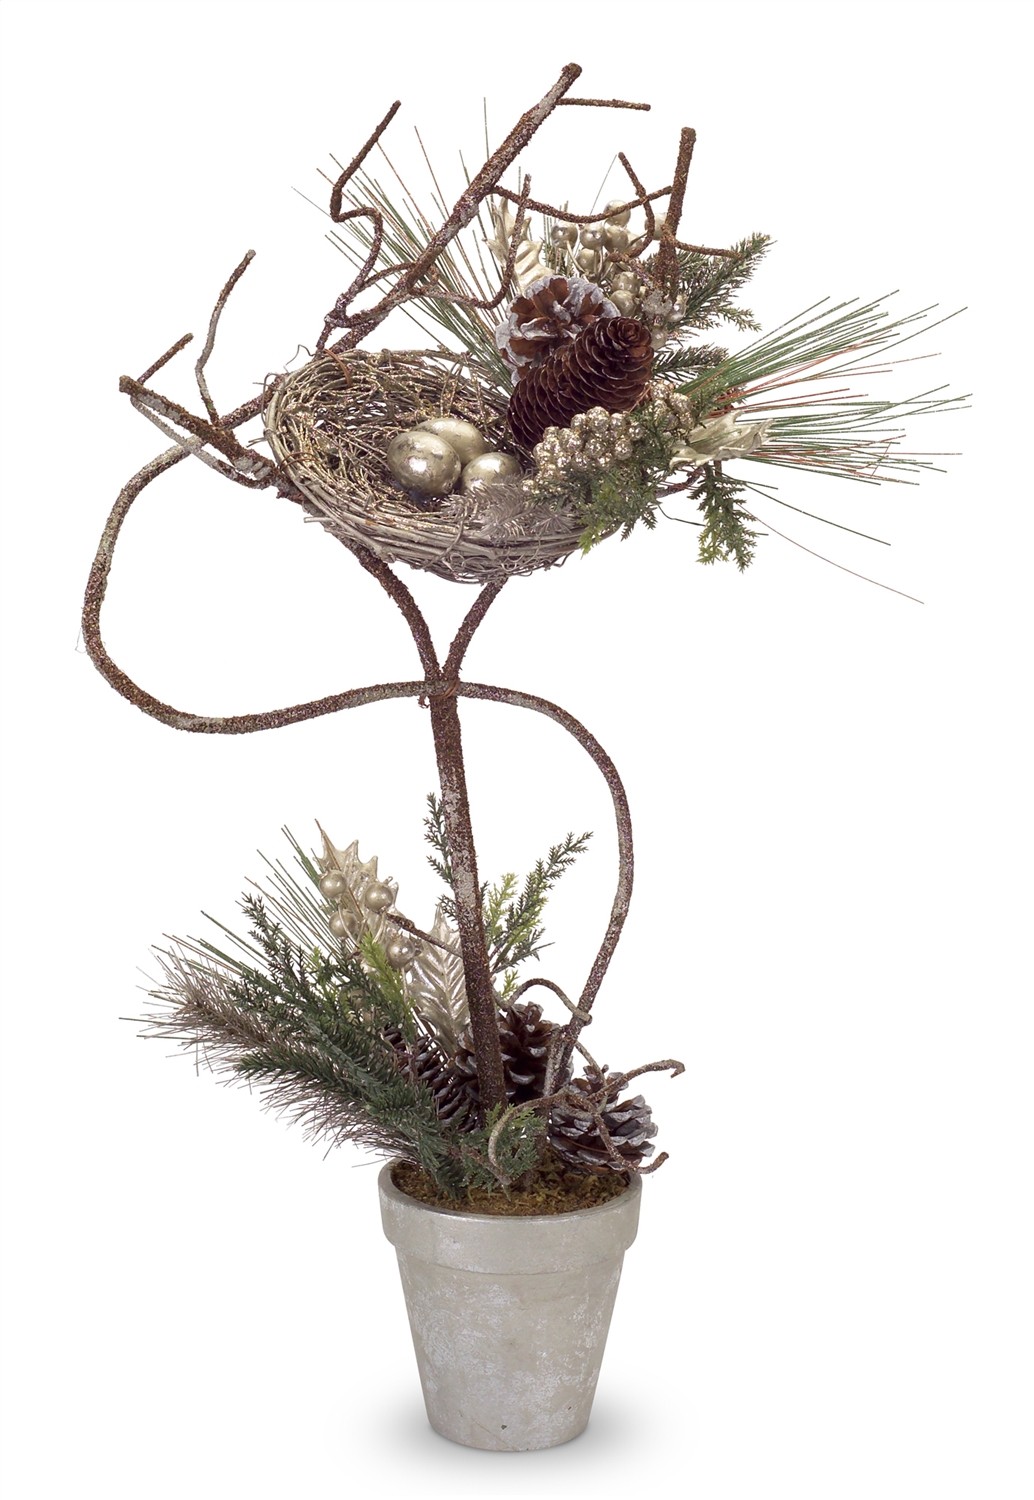 Mixed Pine/Holly/Cone Topiary w/Nest 26"H Plastic/Natural